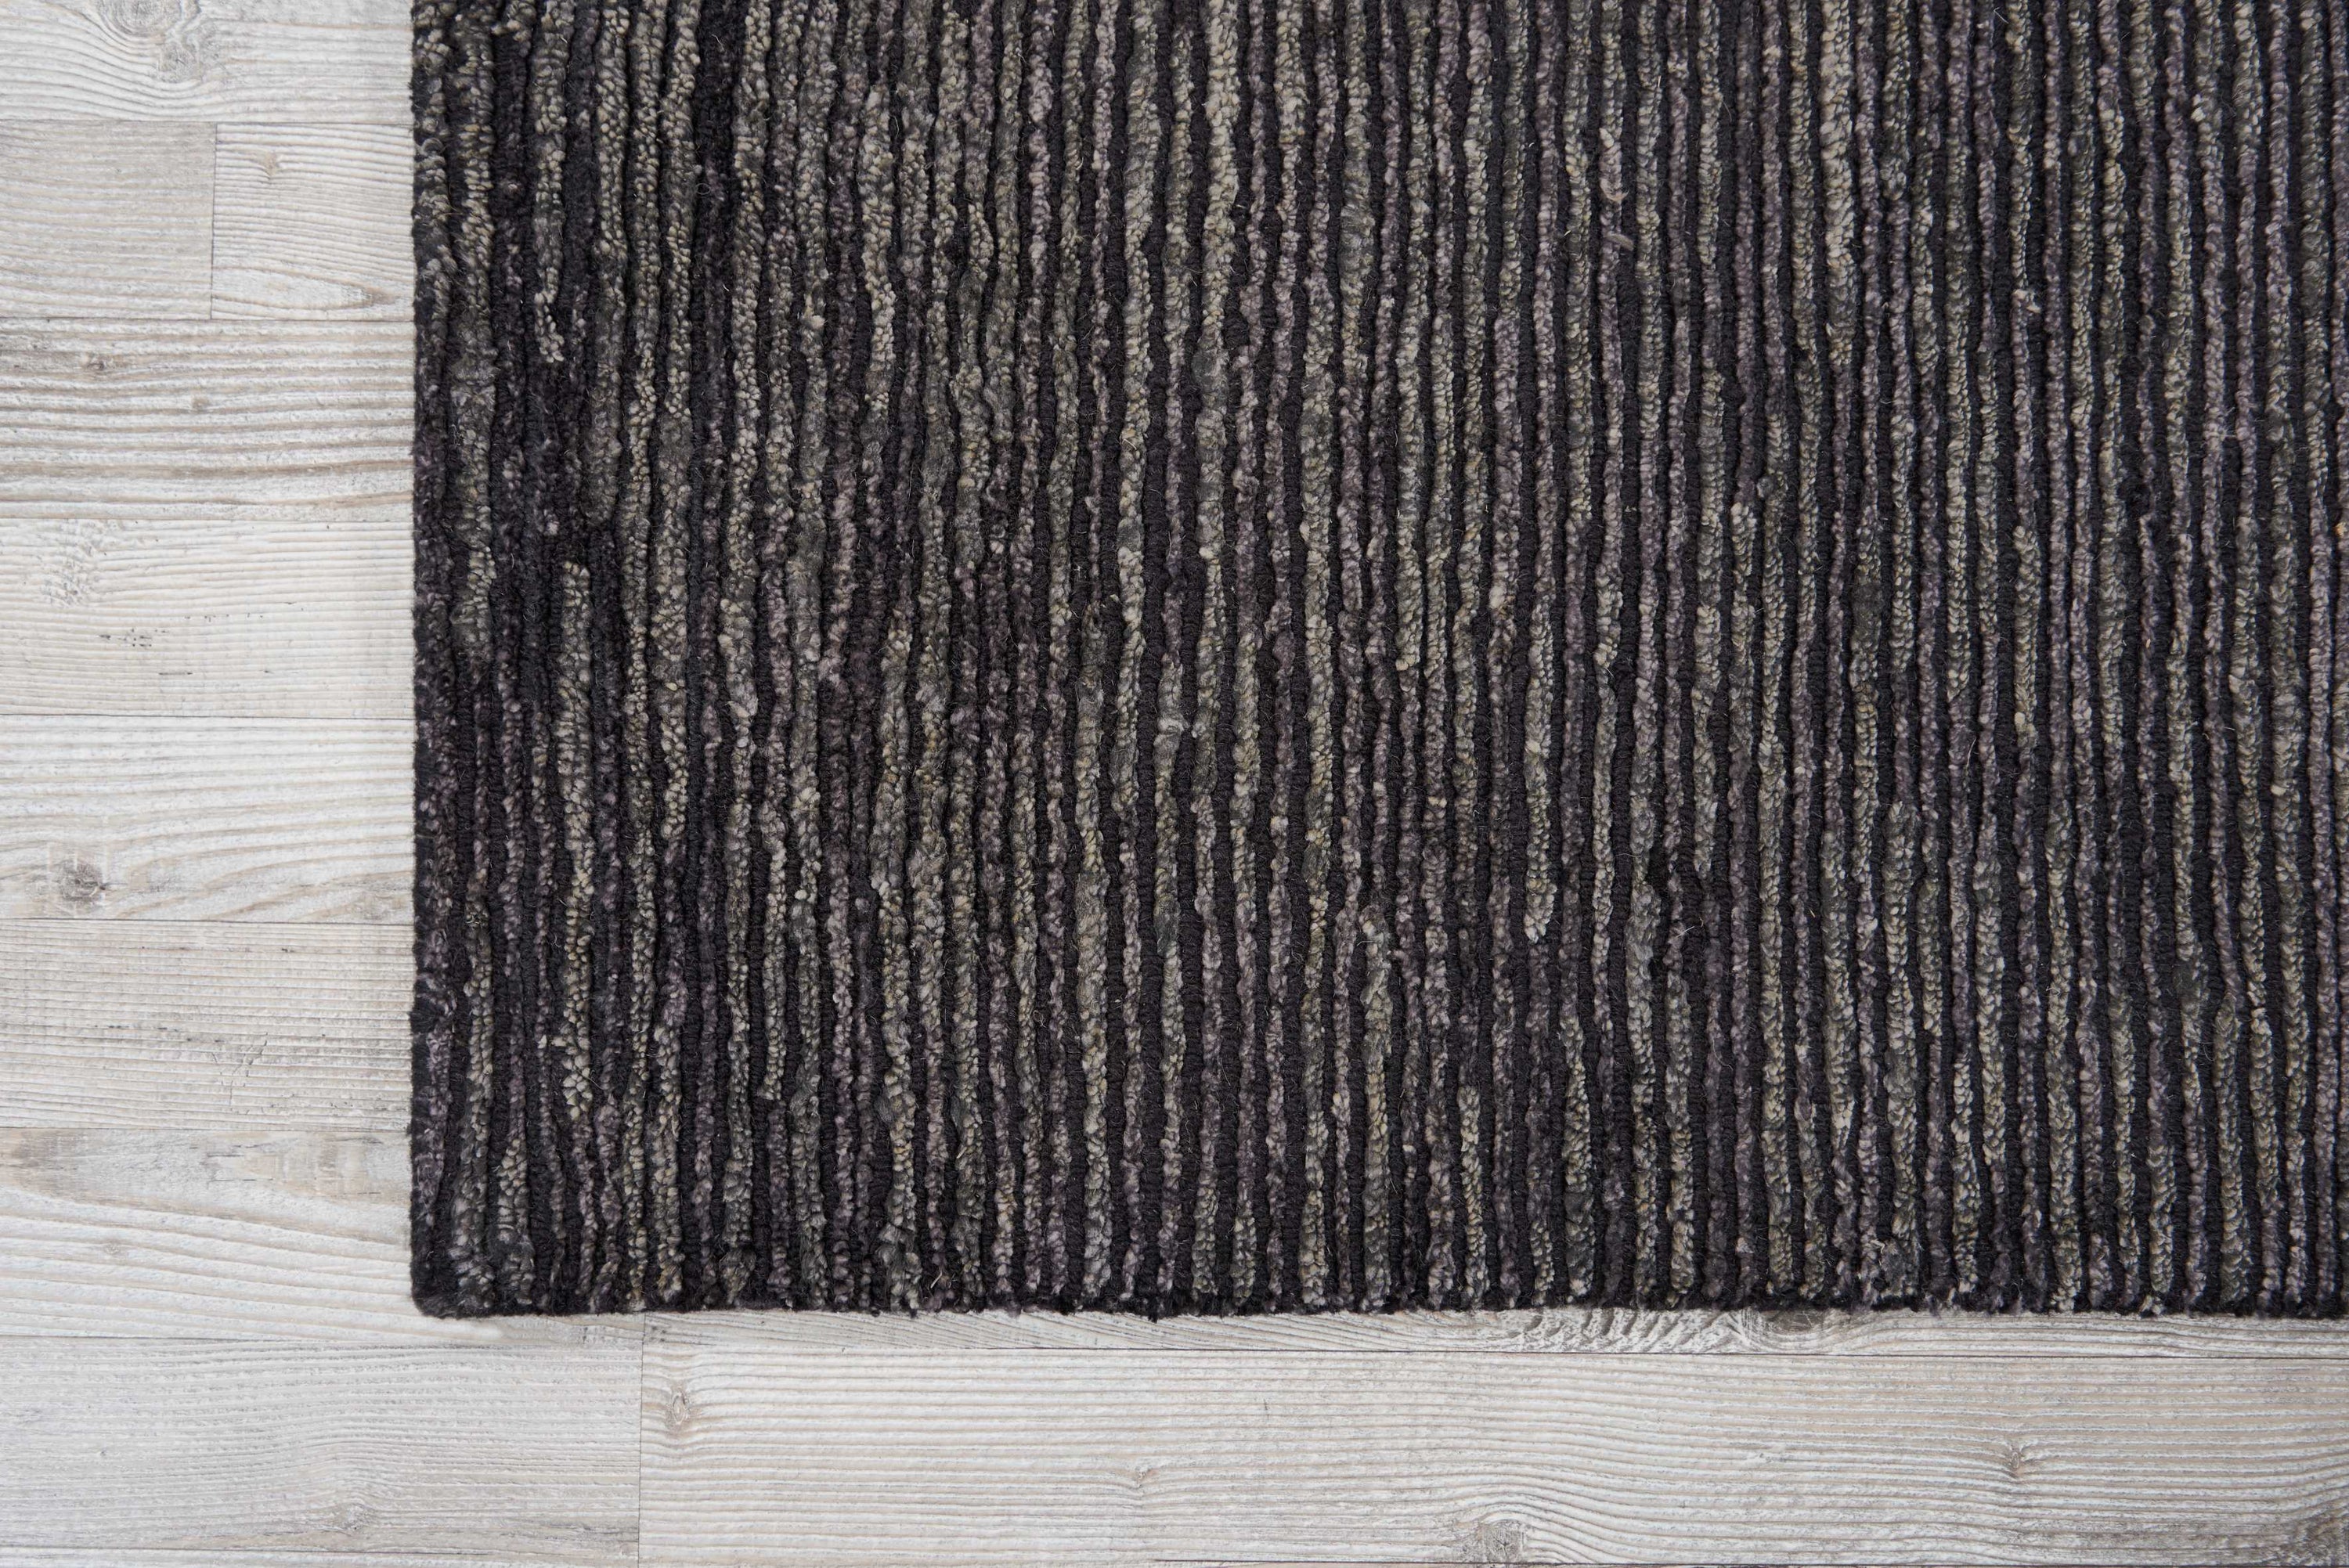 Close-up of textured area rug with striped pattern on wooden floor